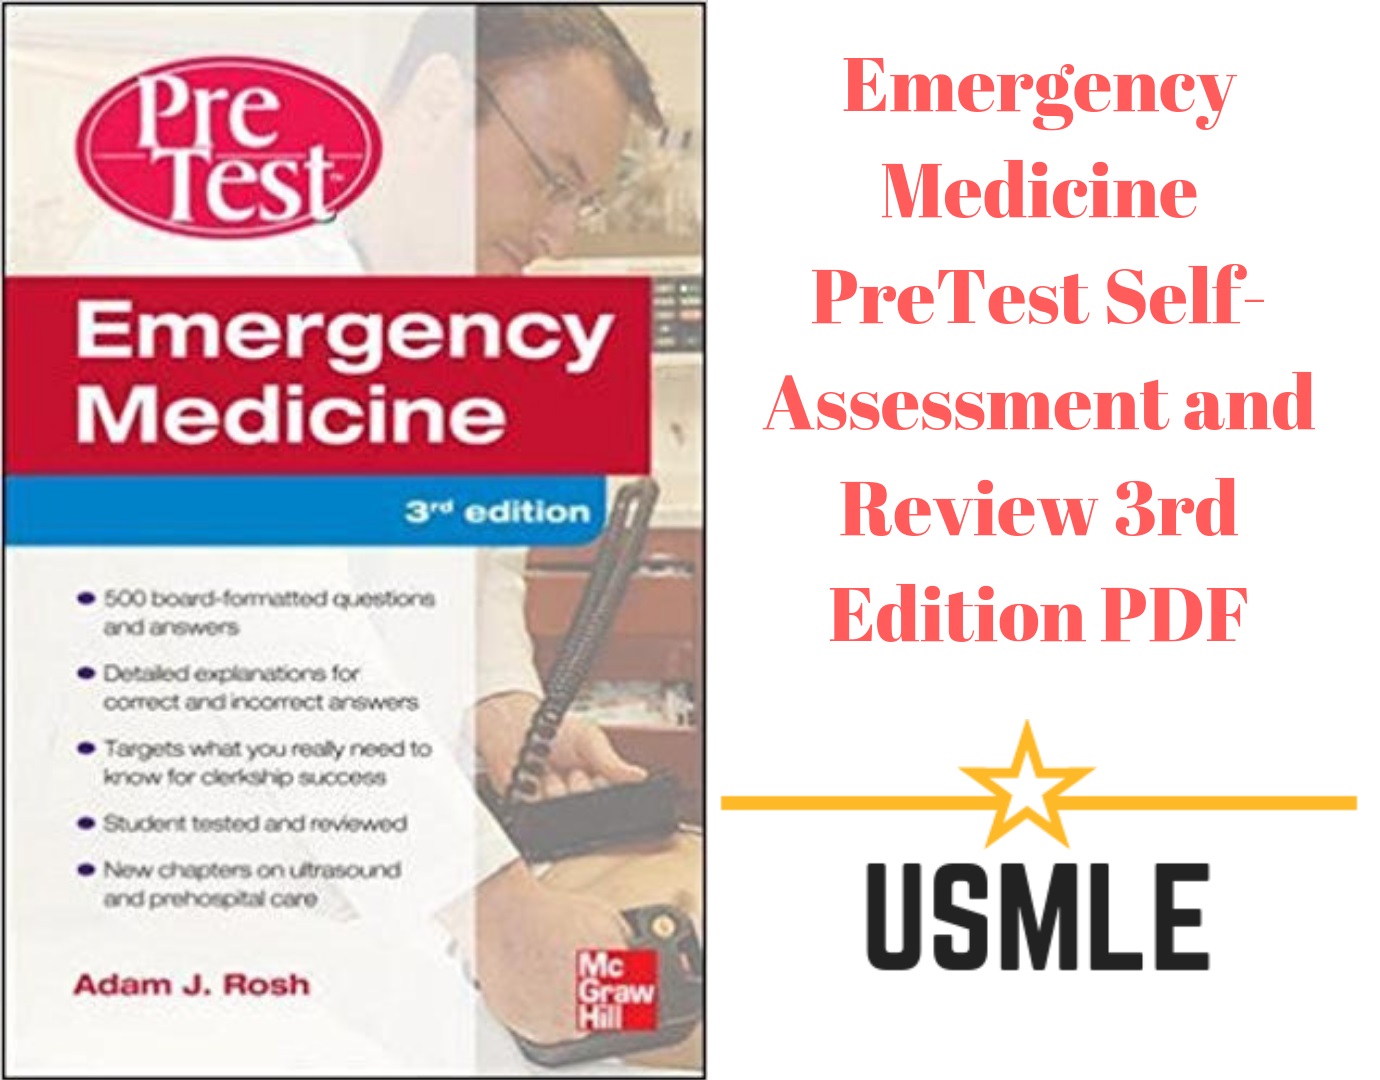 Emergency Medicine PreTest Self-Assessment and Review 3rd Edition